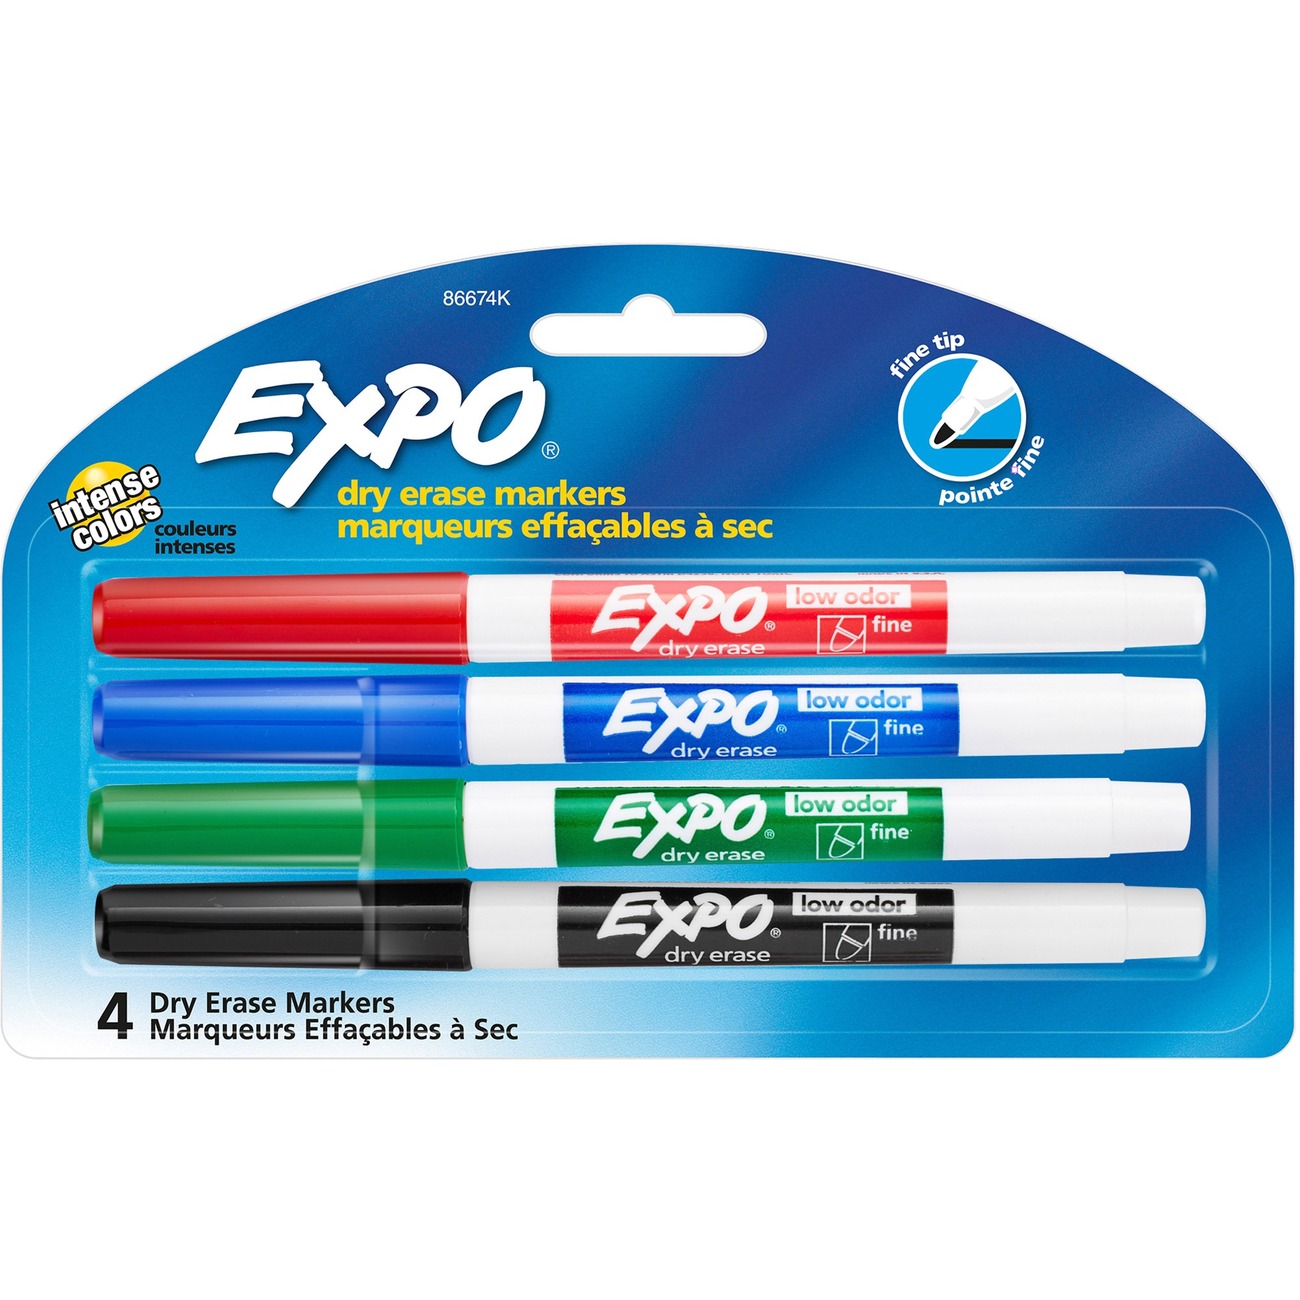 BIC Chisel Tip Dry Erase Magic Markers, Assorted - 4 Pack